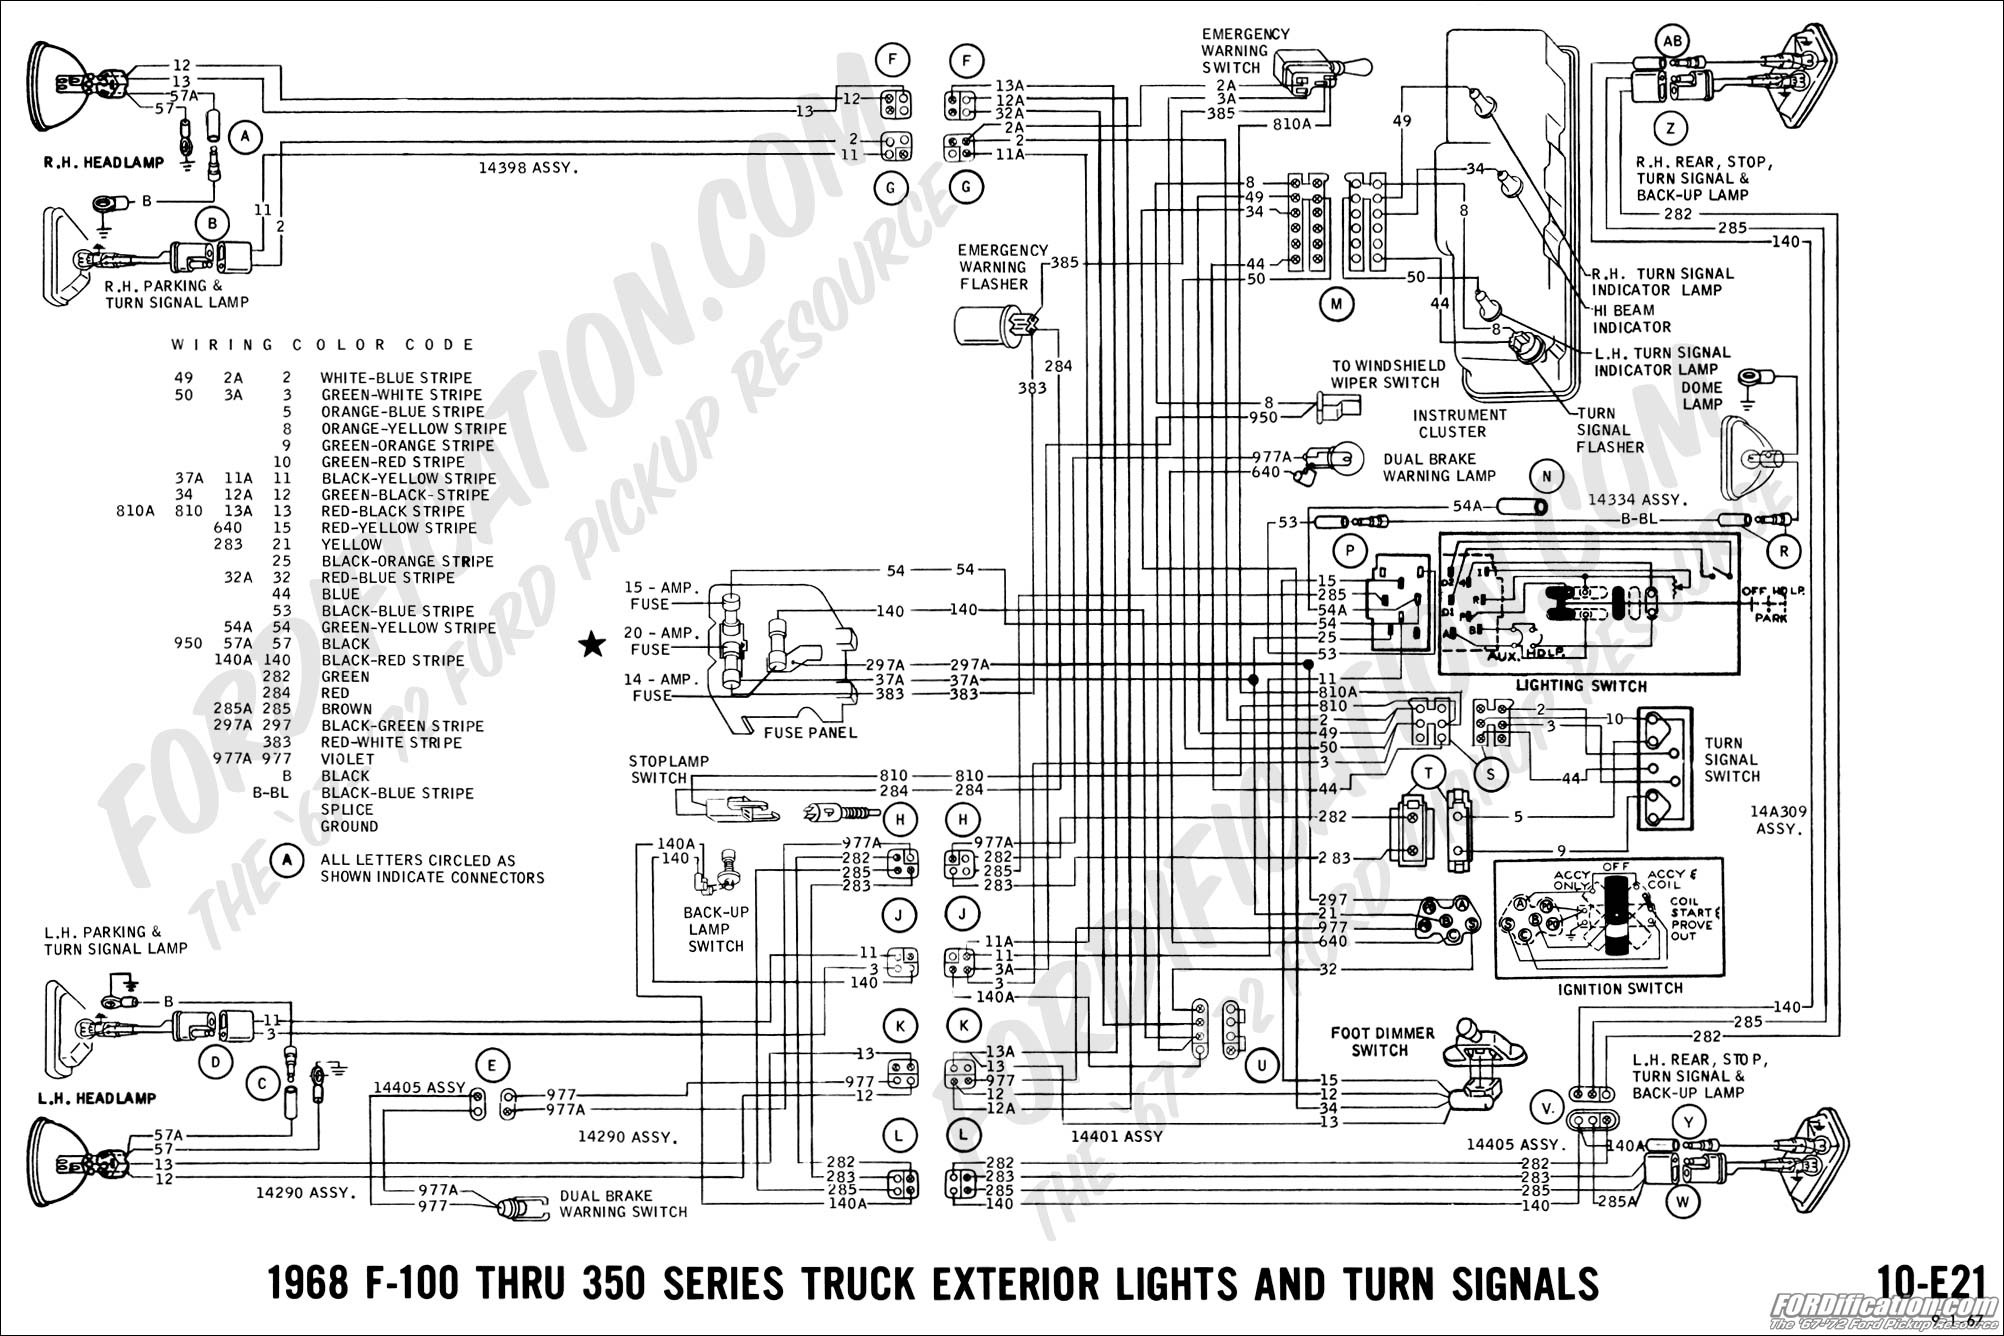 Stop Light Switch Wiring Diagram ford Truck Technical Drawings and Schematics Section H Wiring Of Stop Light Switch Wiring Diagram